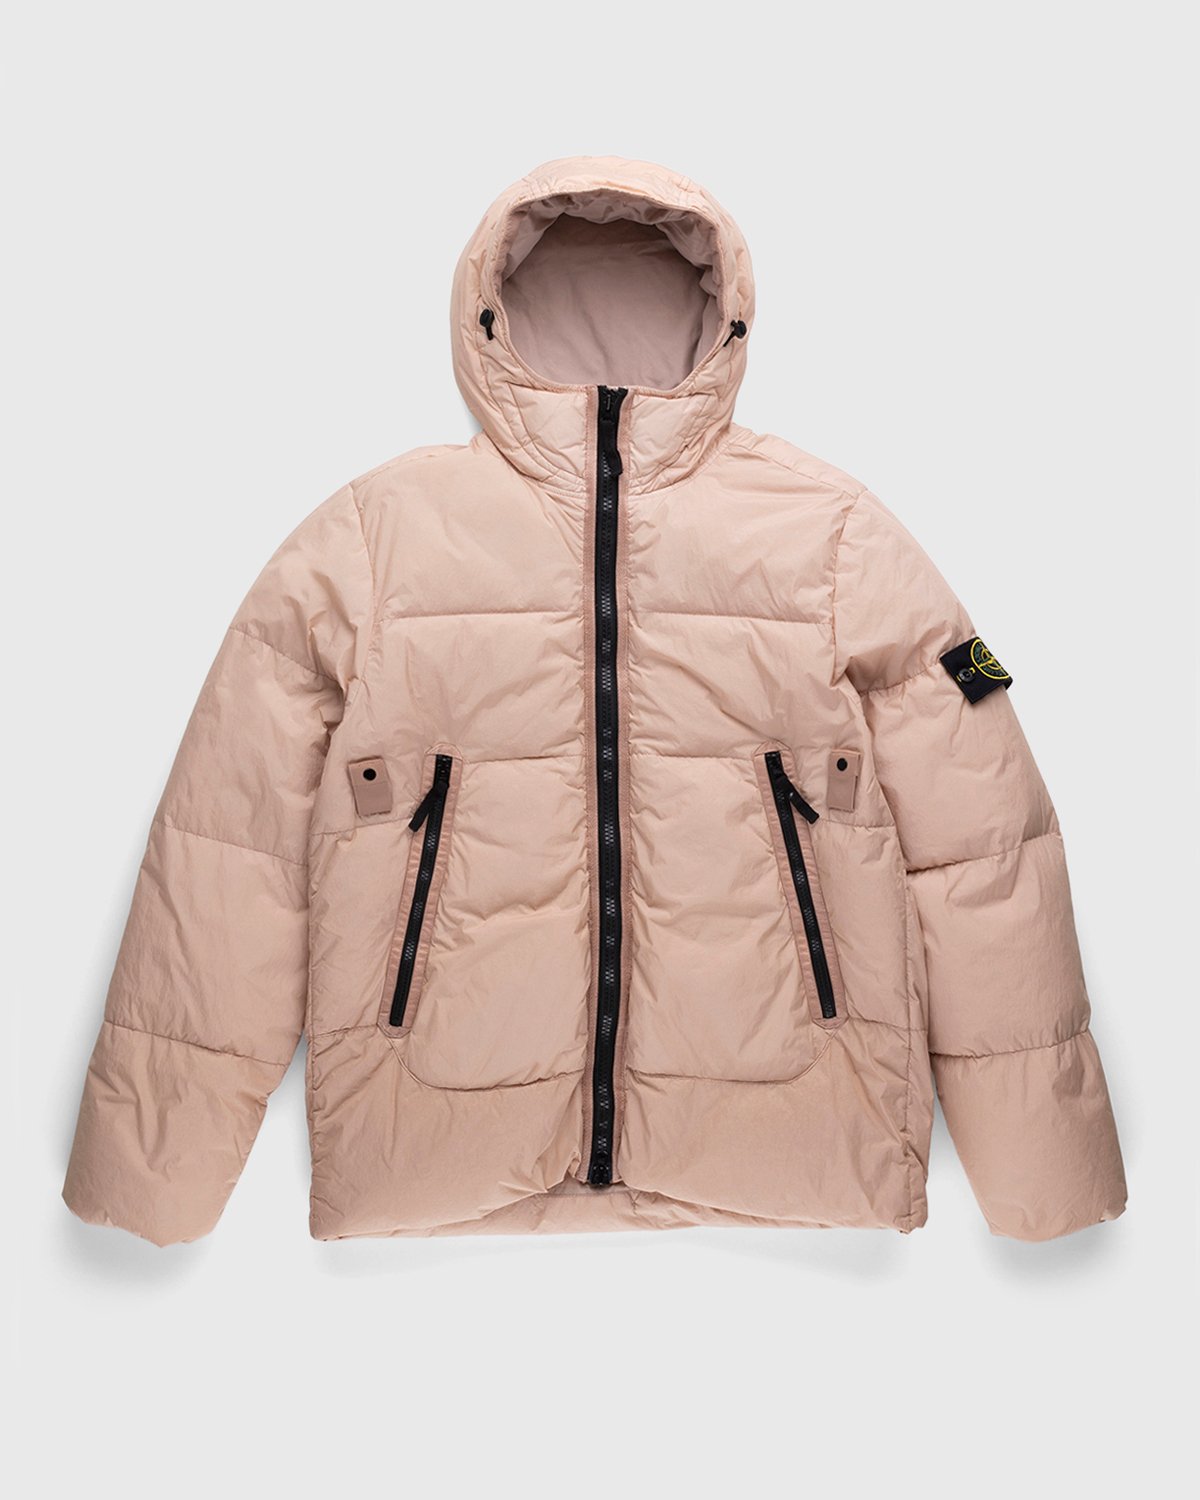 Stone Island - Real Down Jacket Rustic Rose - Clothing - Pink - Image 1